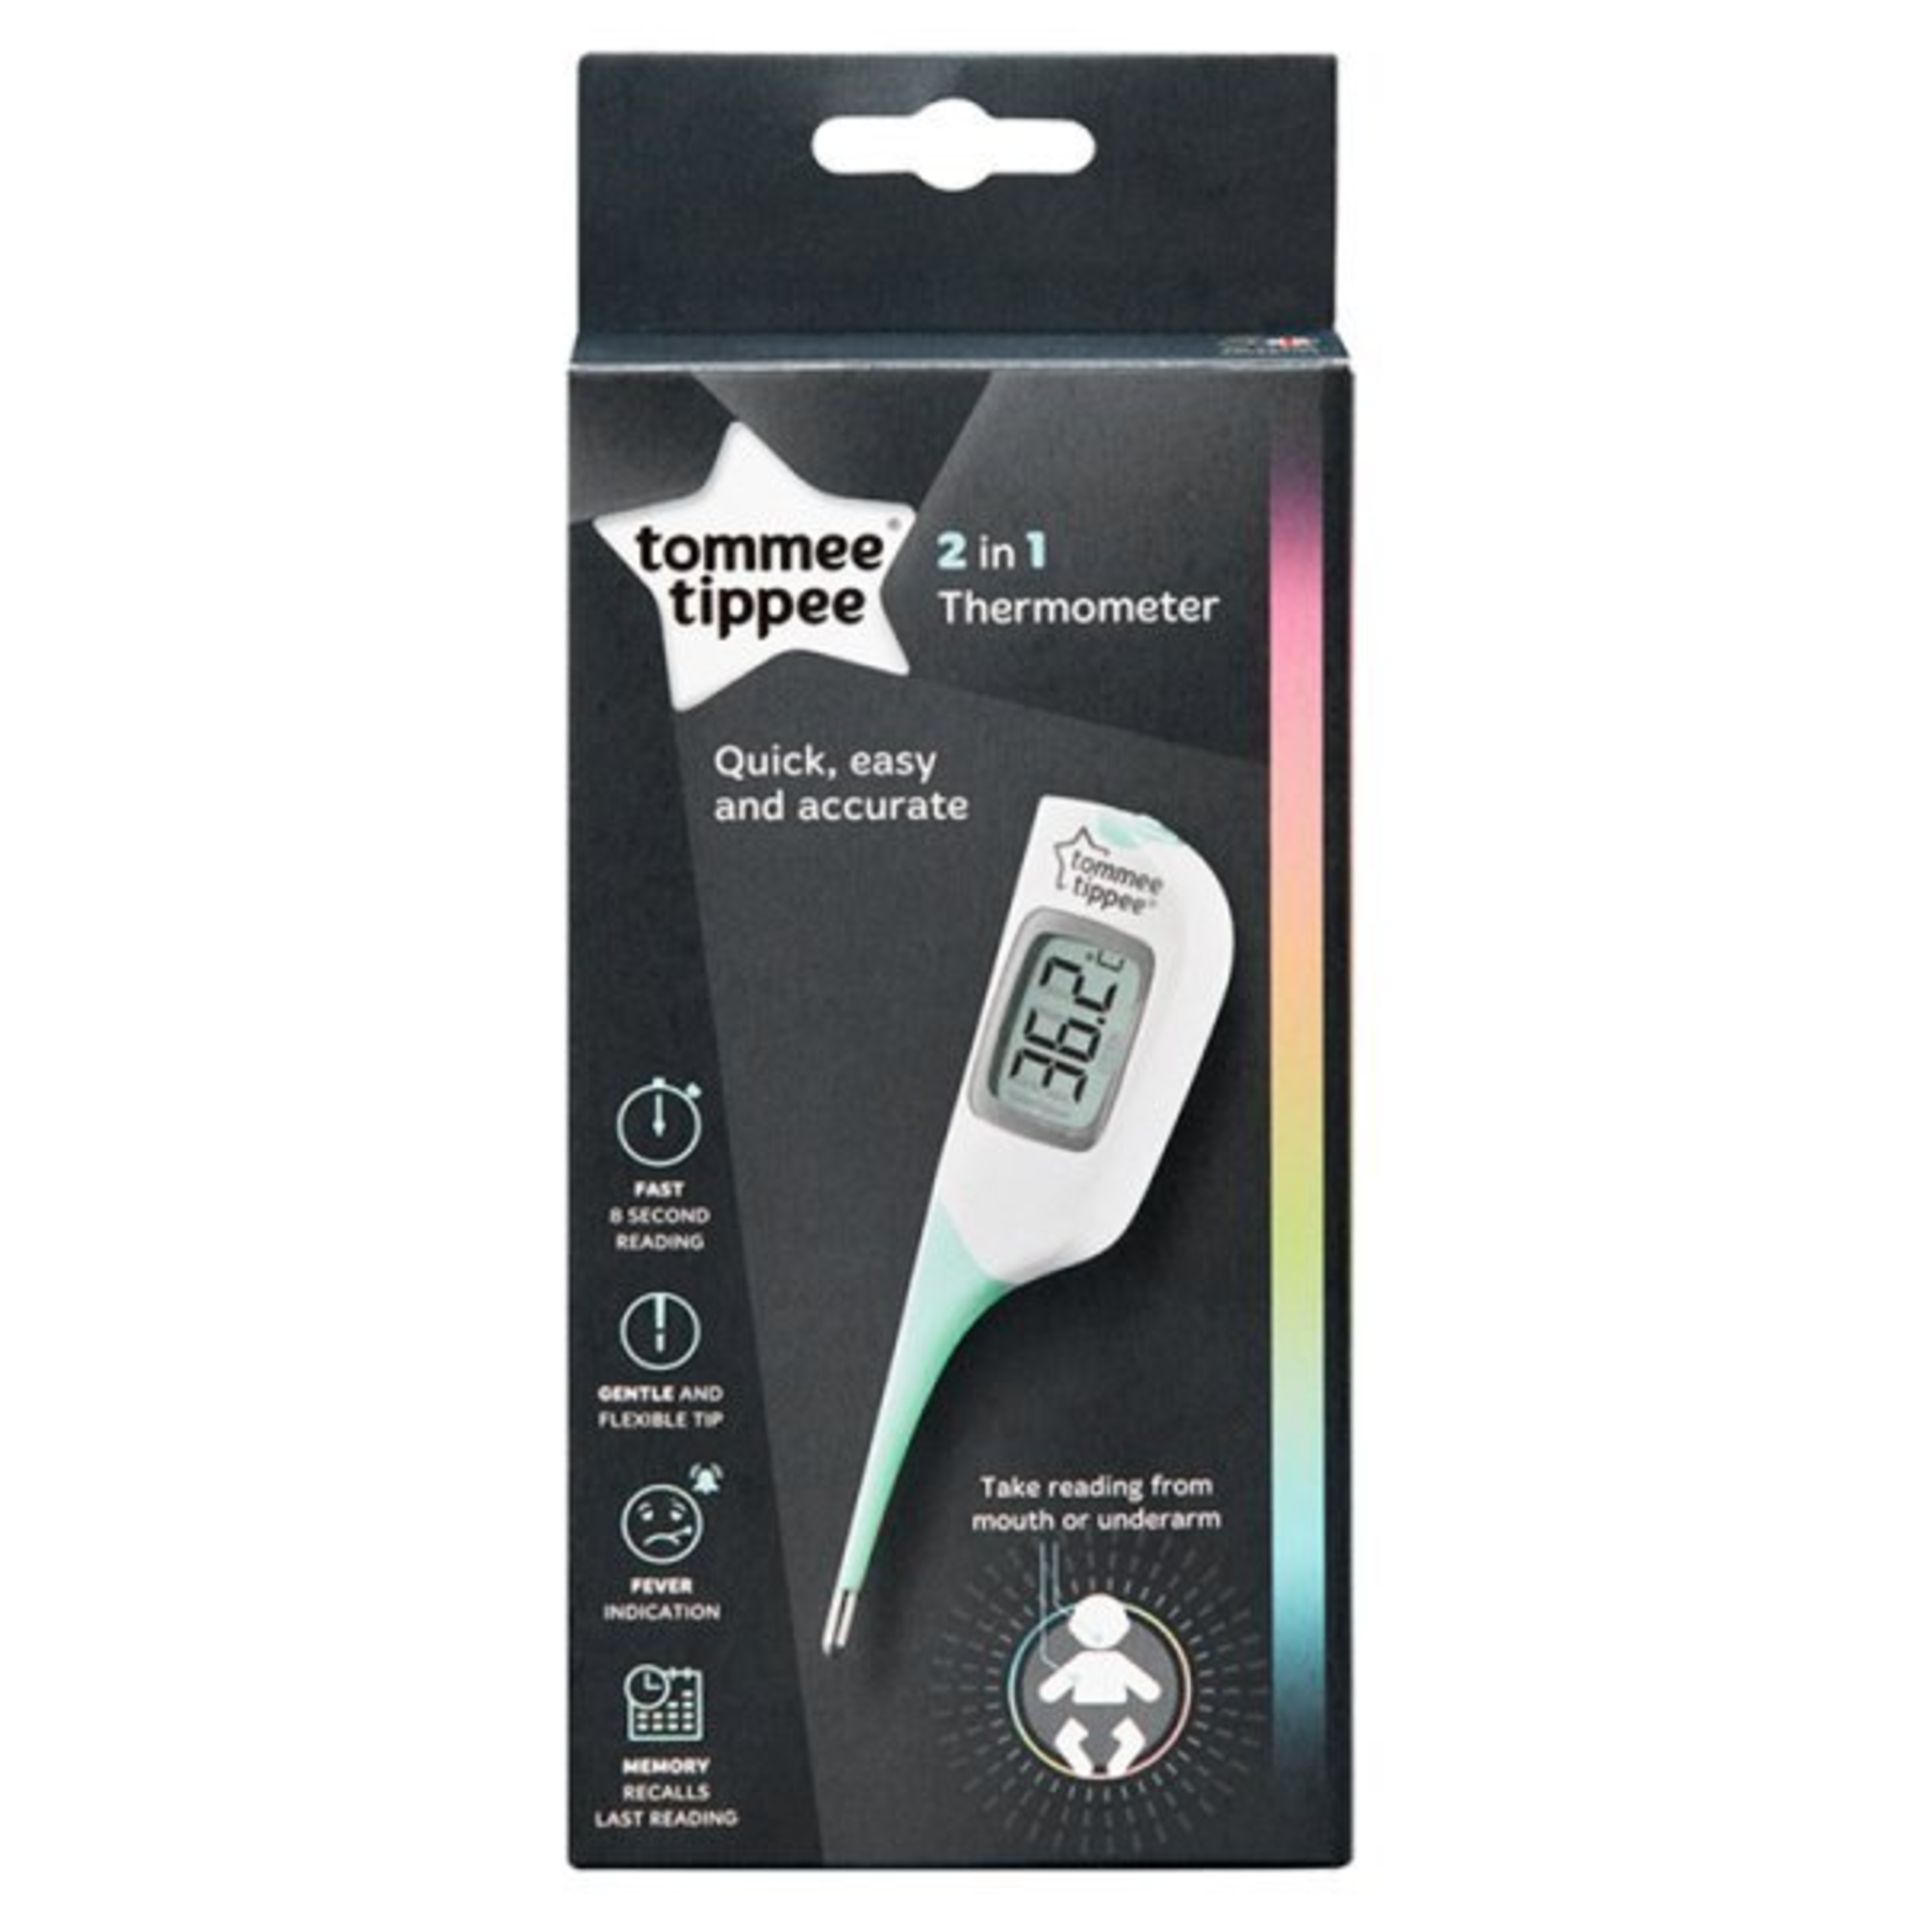 tommee tippee 2-in-1 thermometer